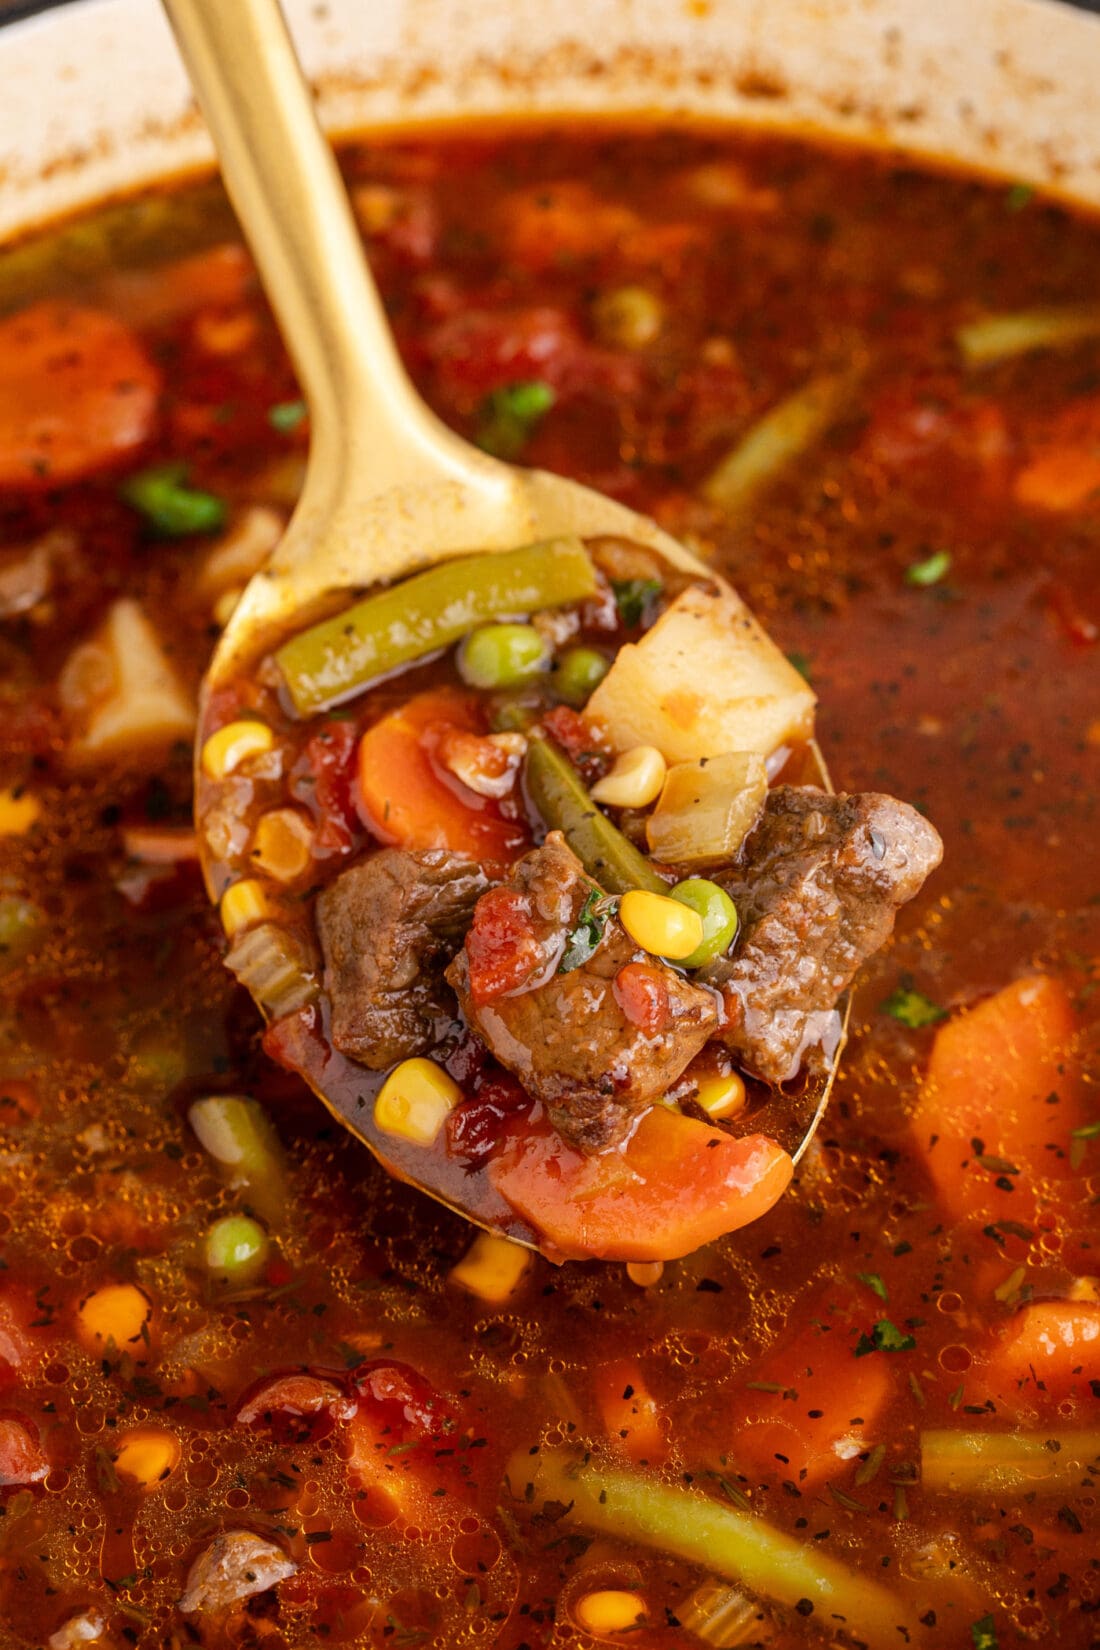 Close up photo of a spoonful of Vegetable Beef Soup